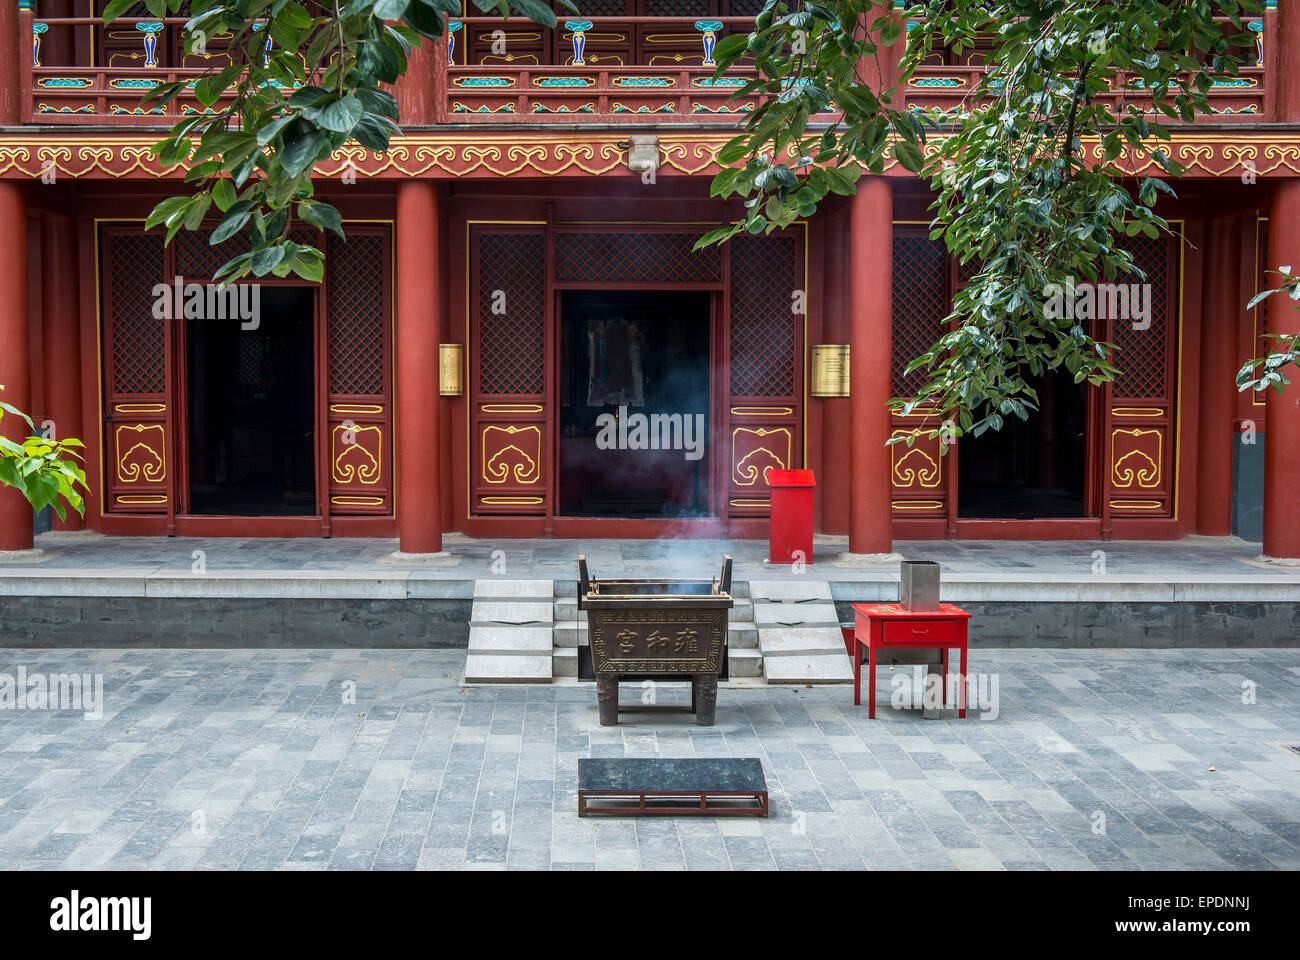 , Yonghegong Lama Temple, Beijing, Chine Banque D'Images